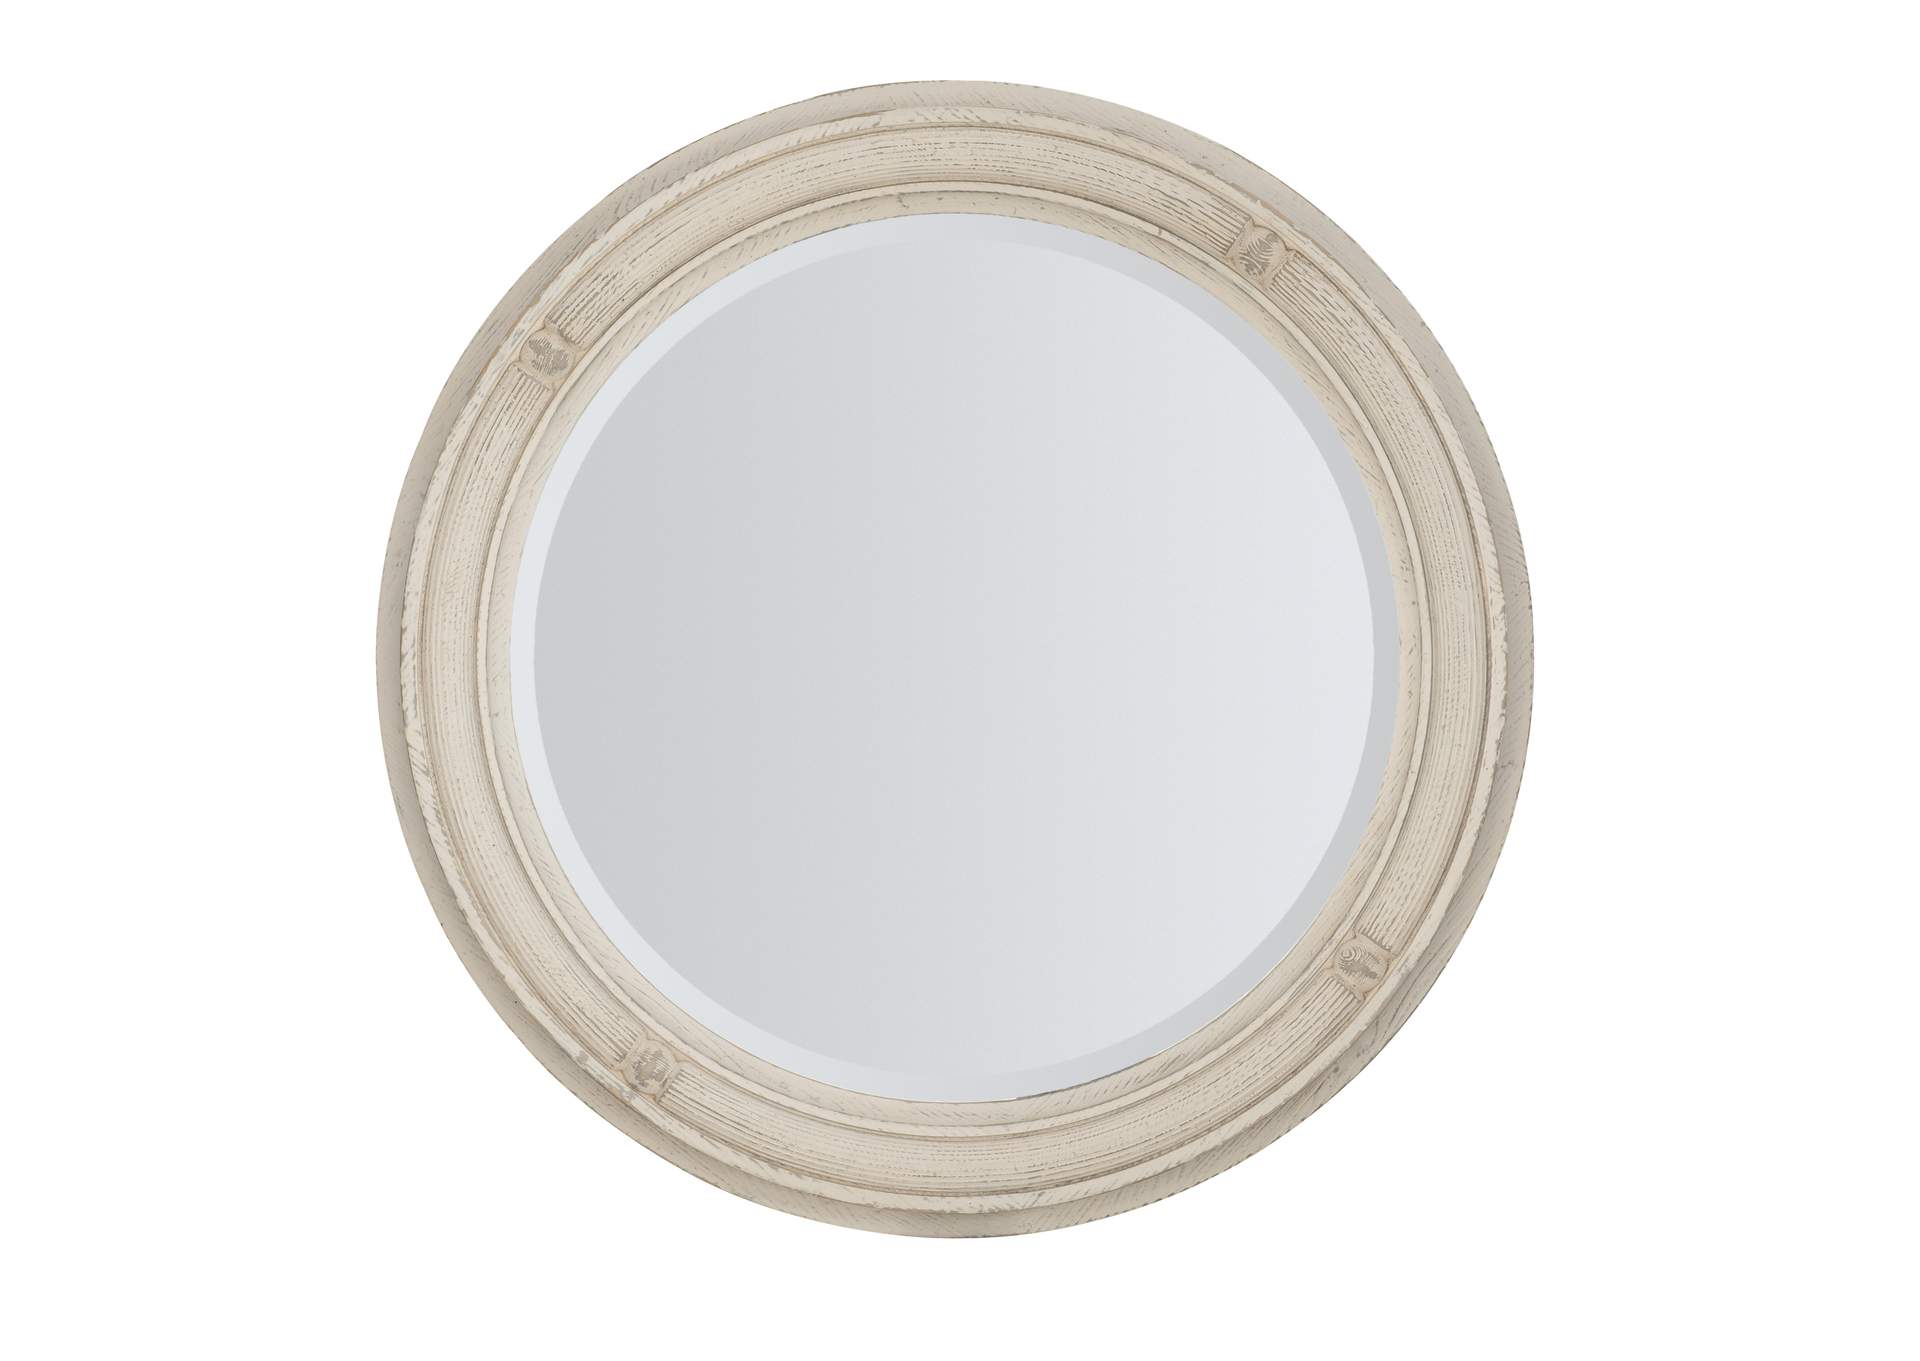 Traditions Round Mirror,Hooker Furniture